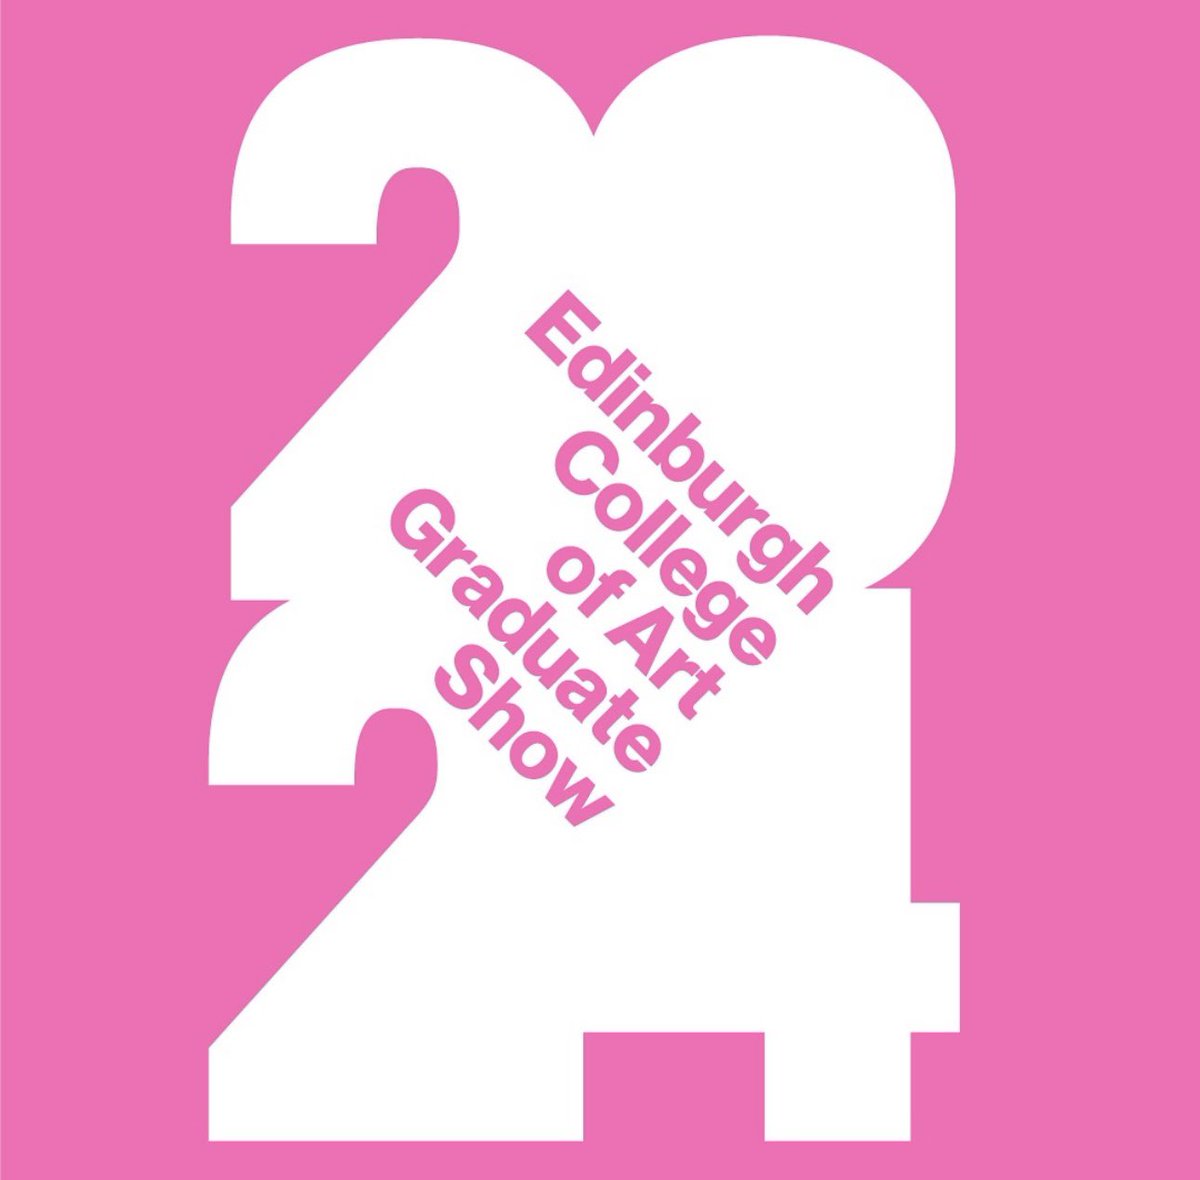 🎨 @eca_edinburgh Graduate Show 2024
📅 Friday 31 May - Sunday 9 June 2024
🕰️ Open 10:00-16:00 (‘til 20:00 Wed 5th/Thurs 6th June)
🎟️ In Person: lnkd.in/evUiNQNX
🖥️ Online: lnkd.in/eh_cHuFp

💎 Visit our fabulous Jewellery and Silversmithing students in room E24!